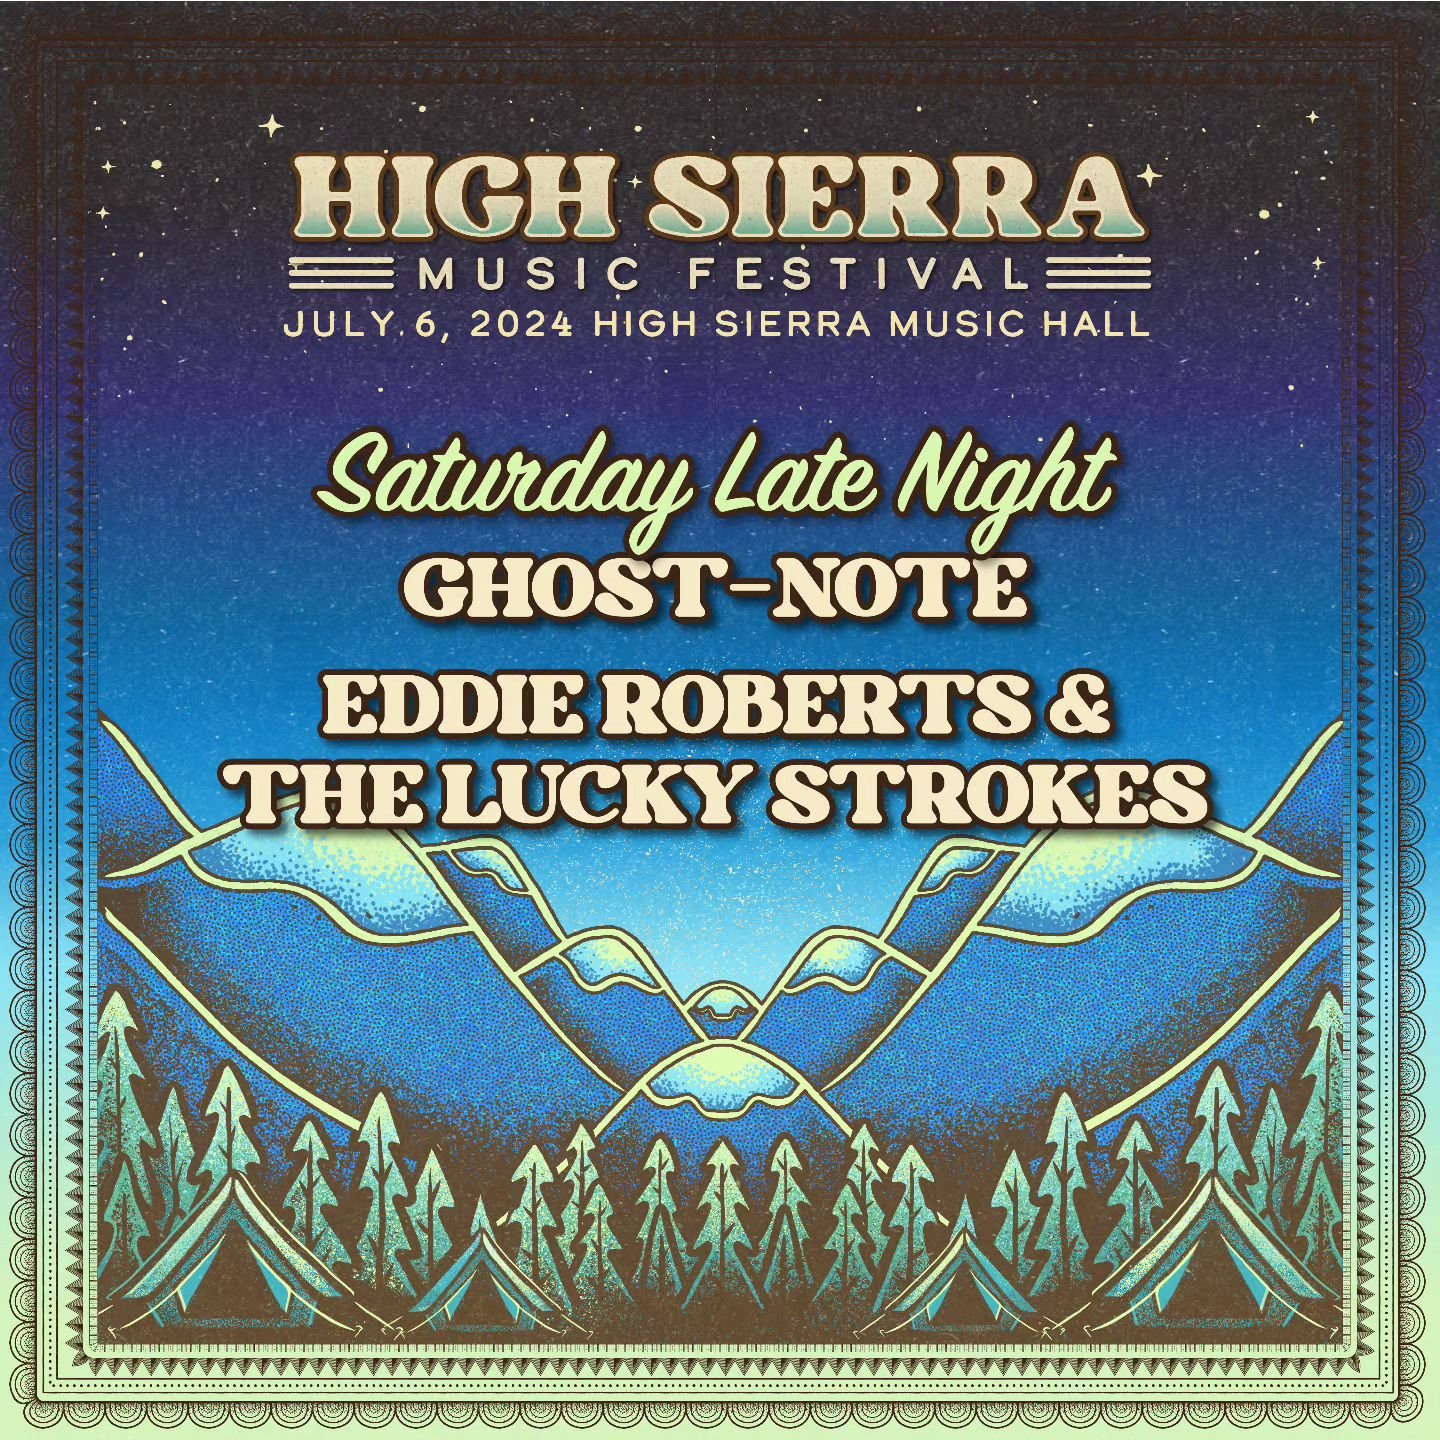 Get ready to dance the night away with the incredible talents of Eddie Roberts and The Lucky Strokes, joined by the dynamic rhythms of Ghost-Note! Tickets are on sale now! 

Ticketing link in bio! 
#HighSierraMusicFestival